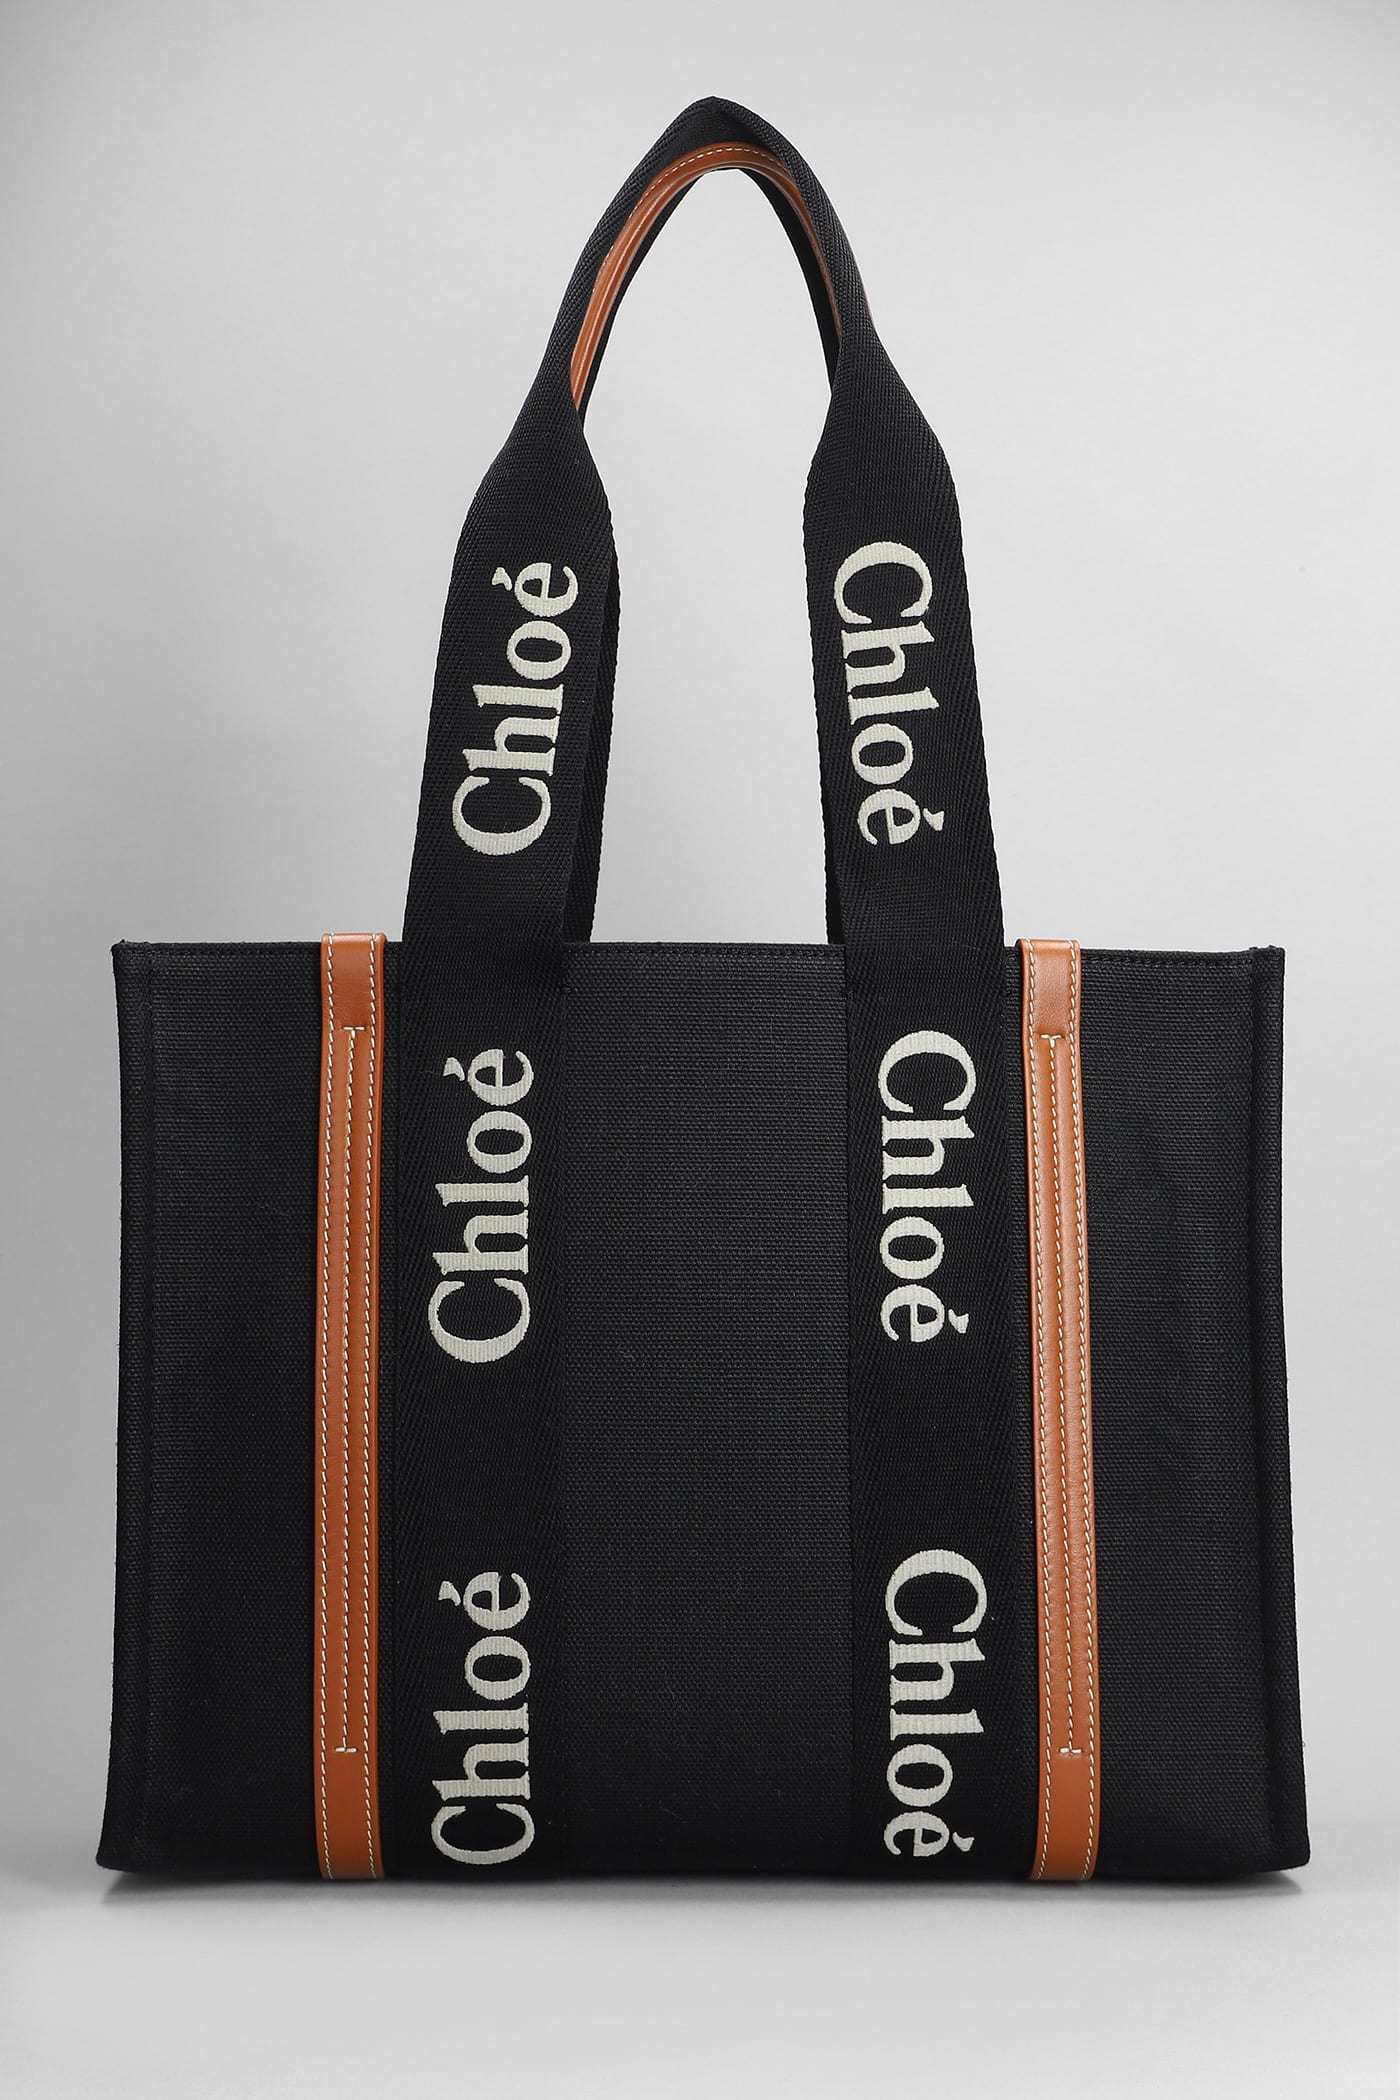 Chloé Woody Tote In Black Canvas